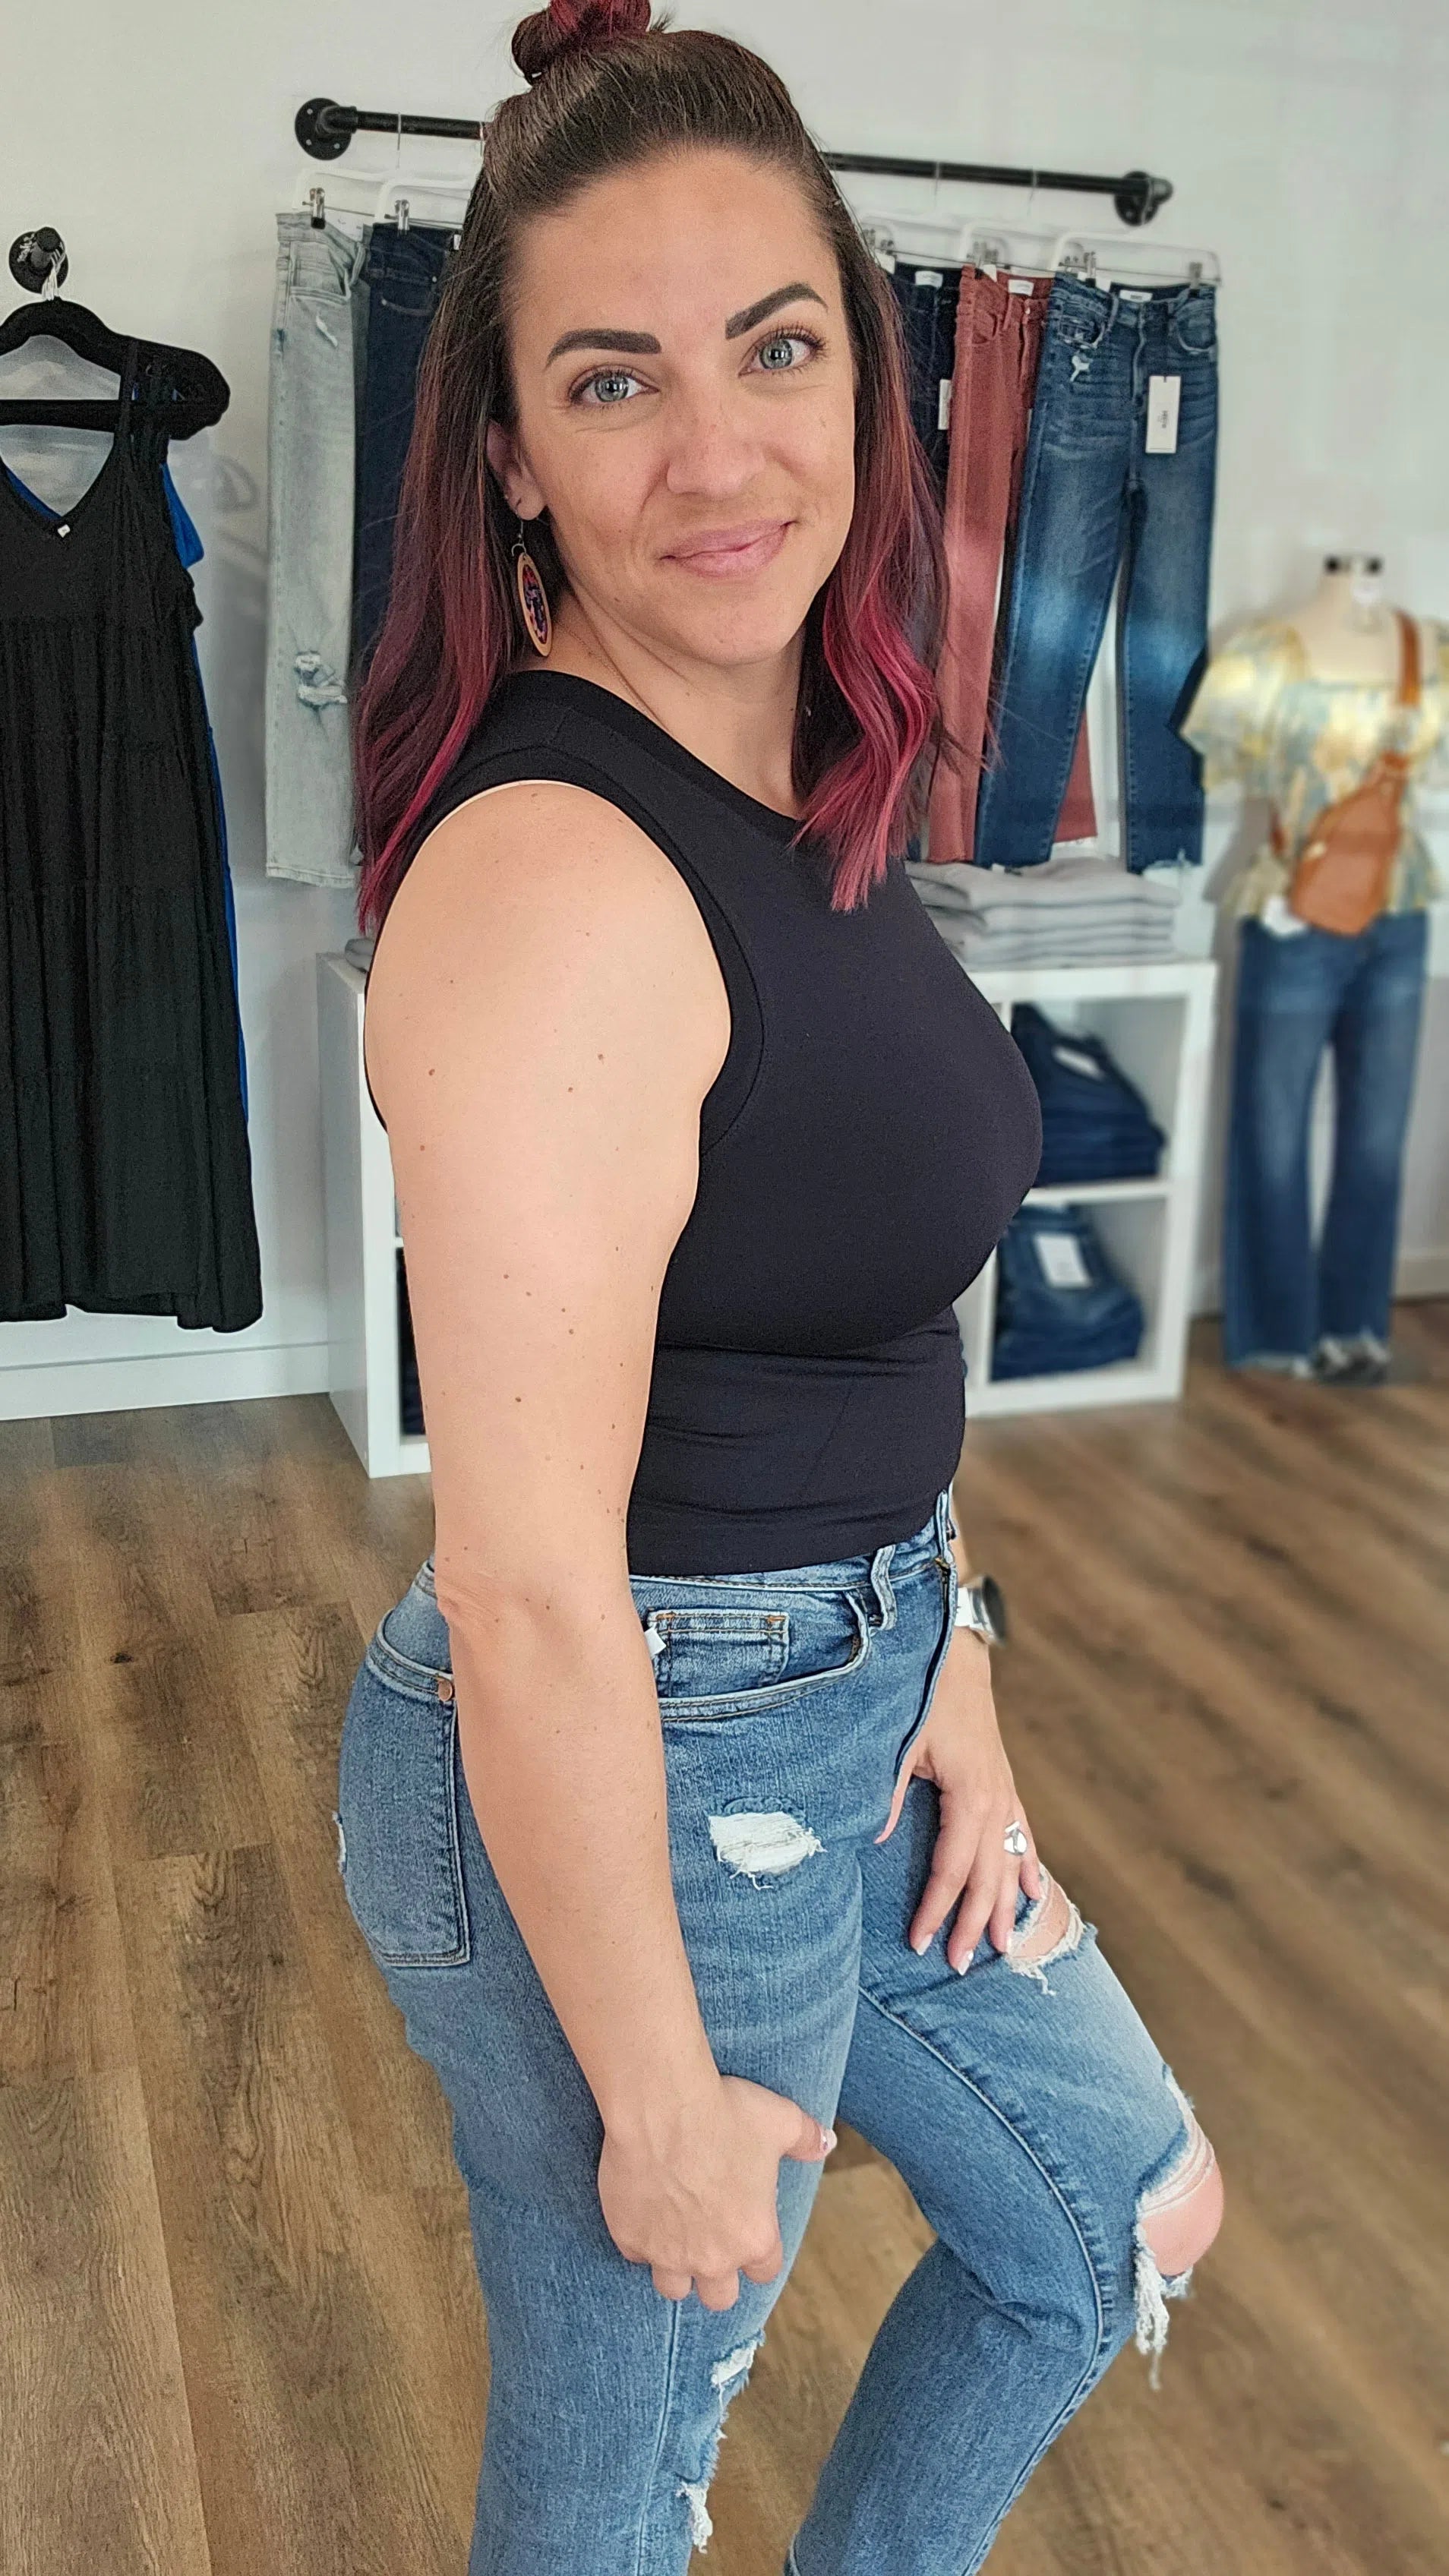 Shop Seamless Crop Tank Top-Shirts & Tops at Ruby Joy Boutique, a Women's Clothing Store in Pickerington, Ohio